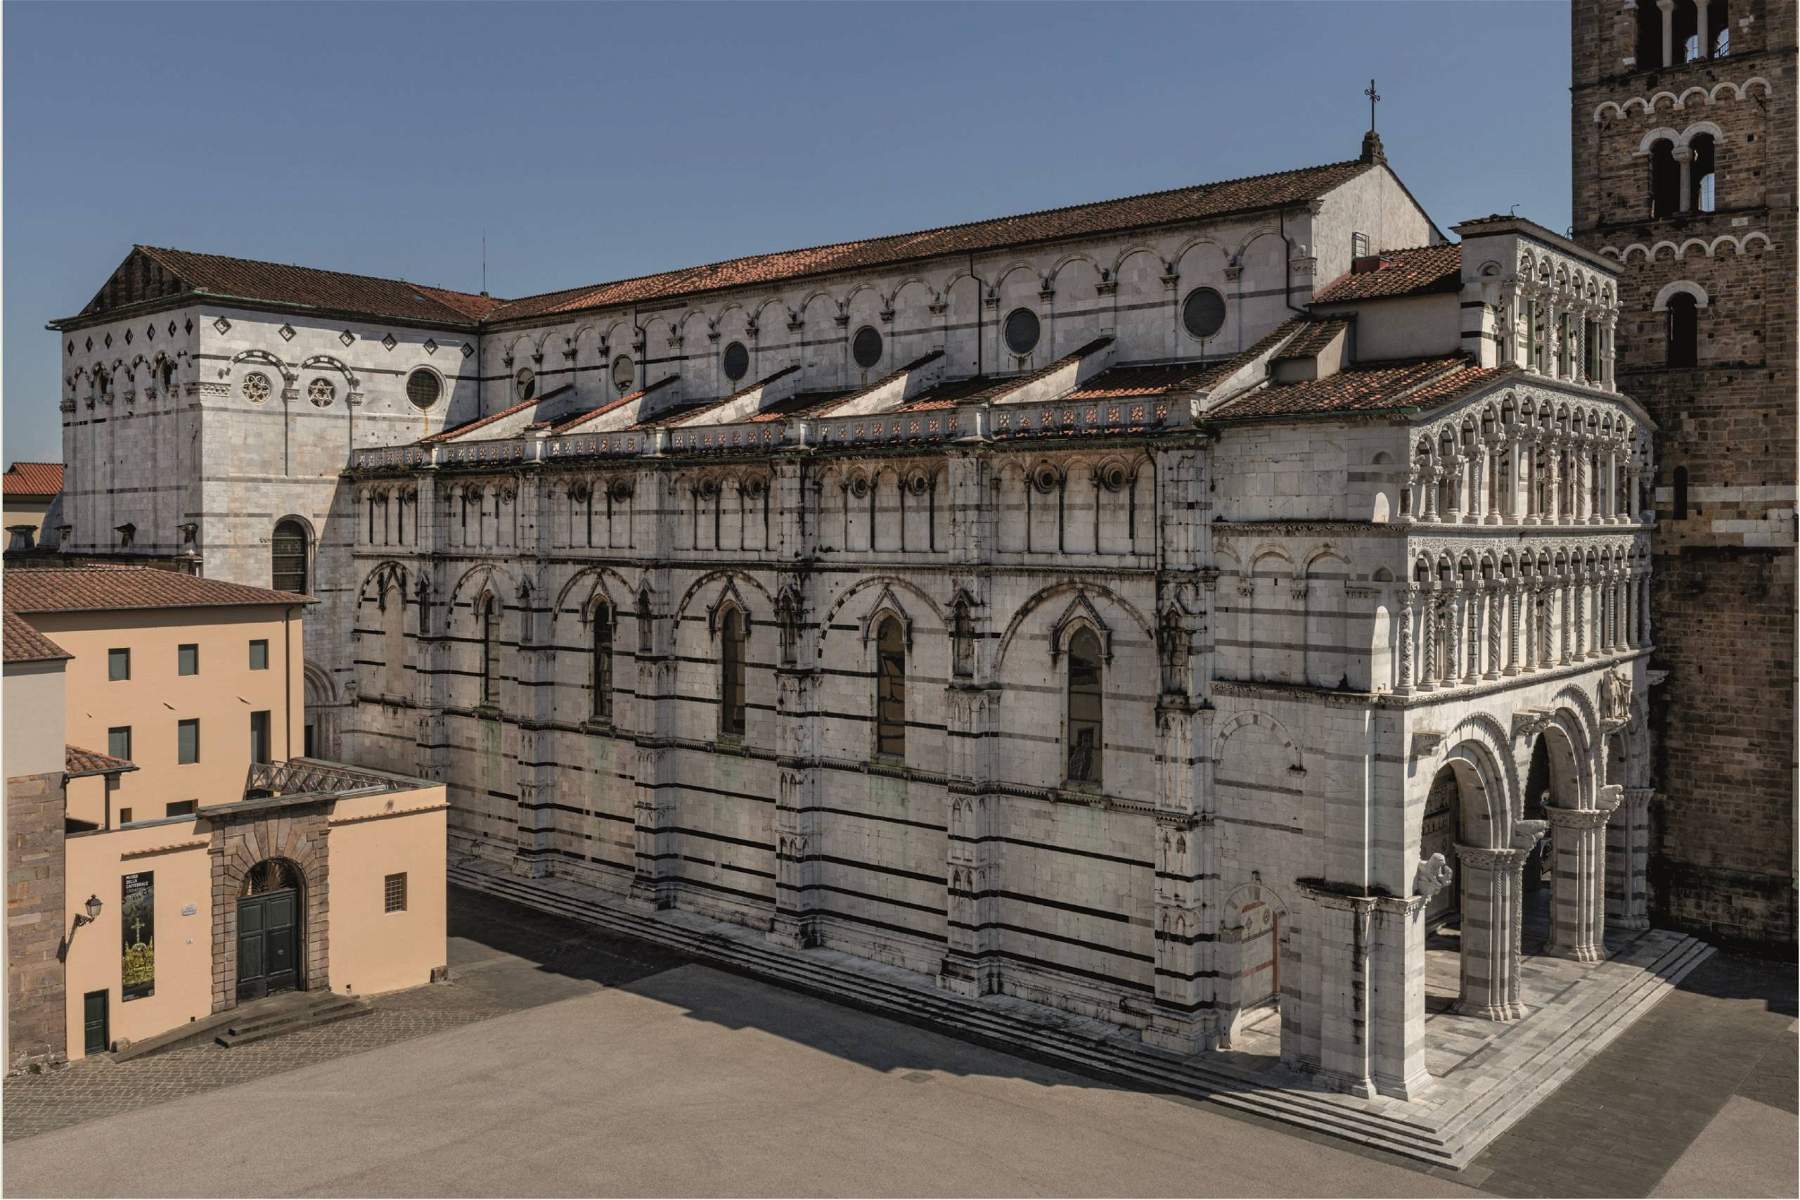 Book comes out on St. Martin's Cathedral in Lucca to tell its 